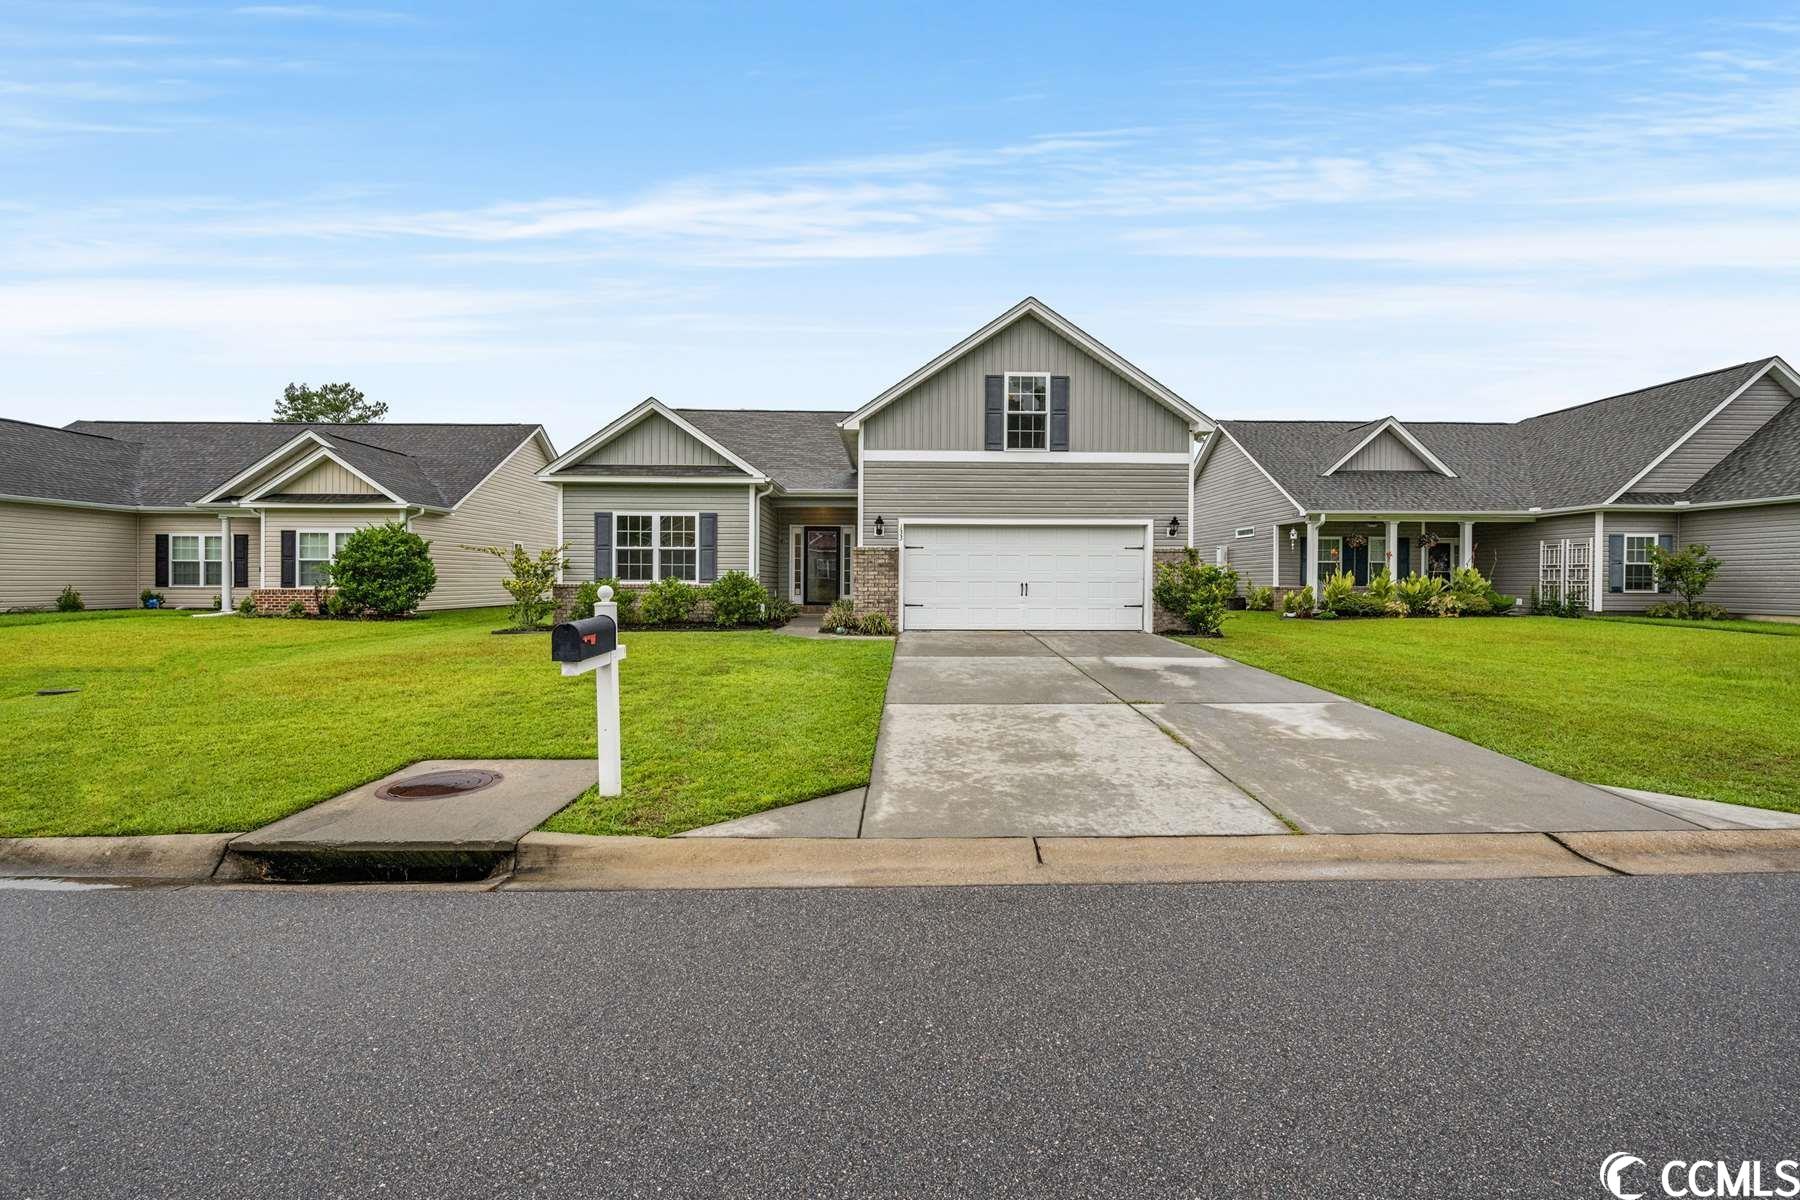 133 Yeomans Dr. Conway, SC 29526